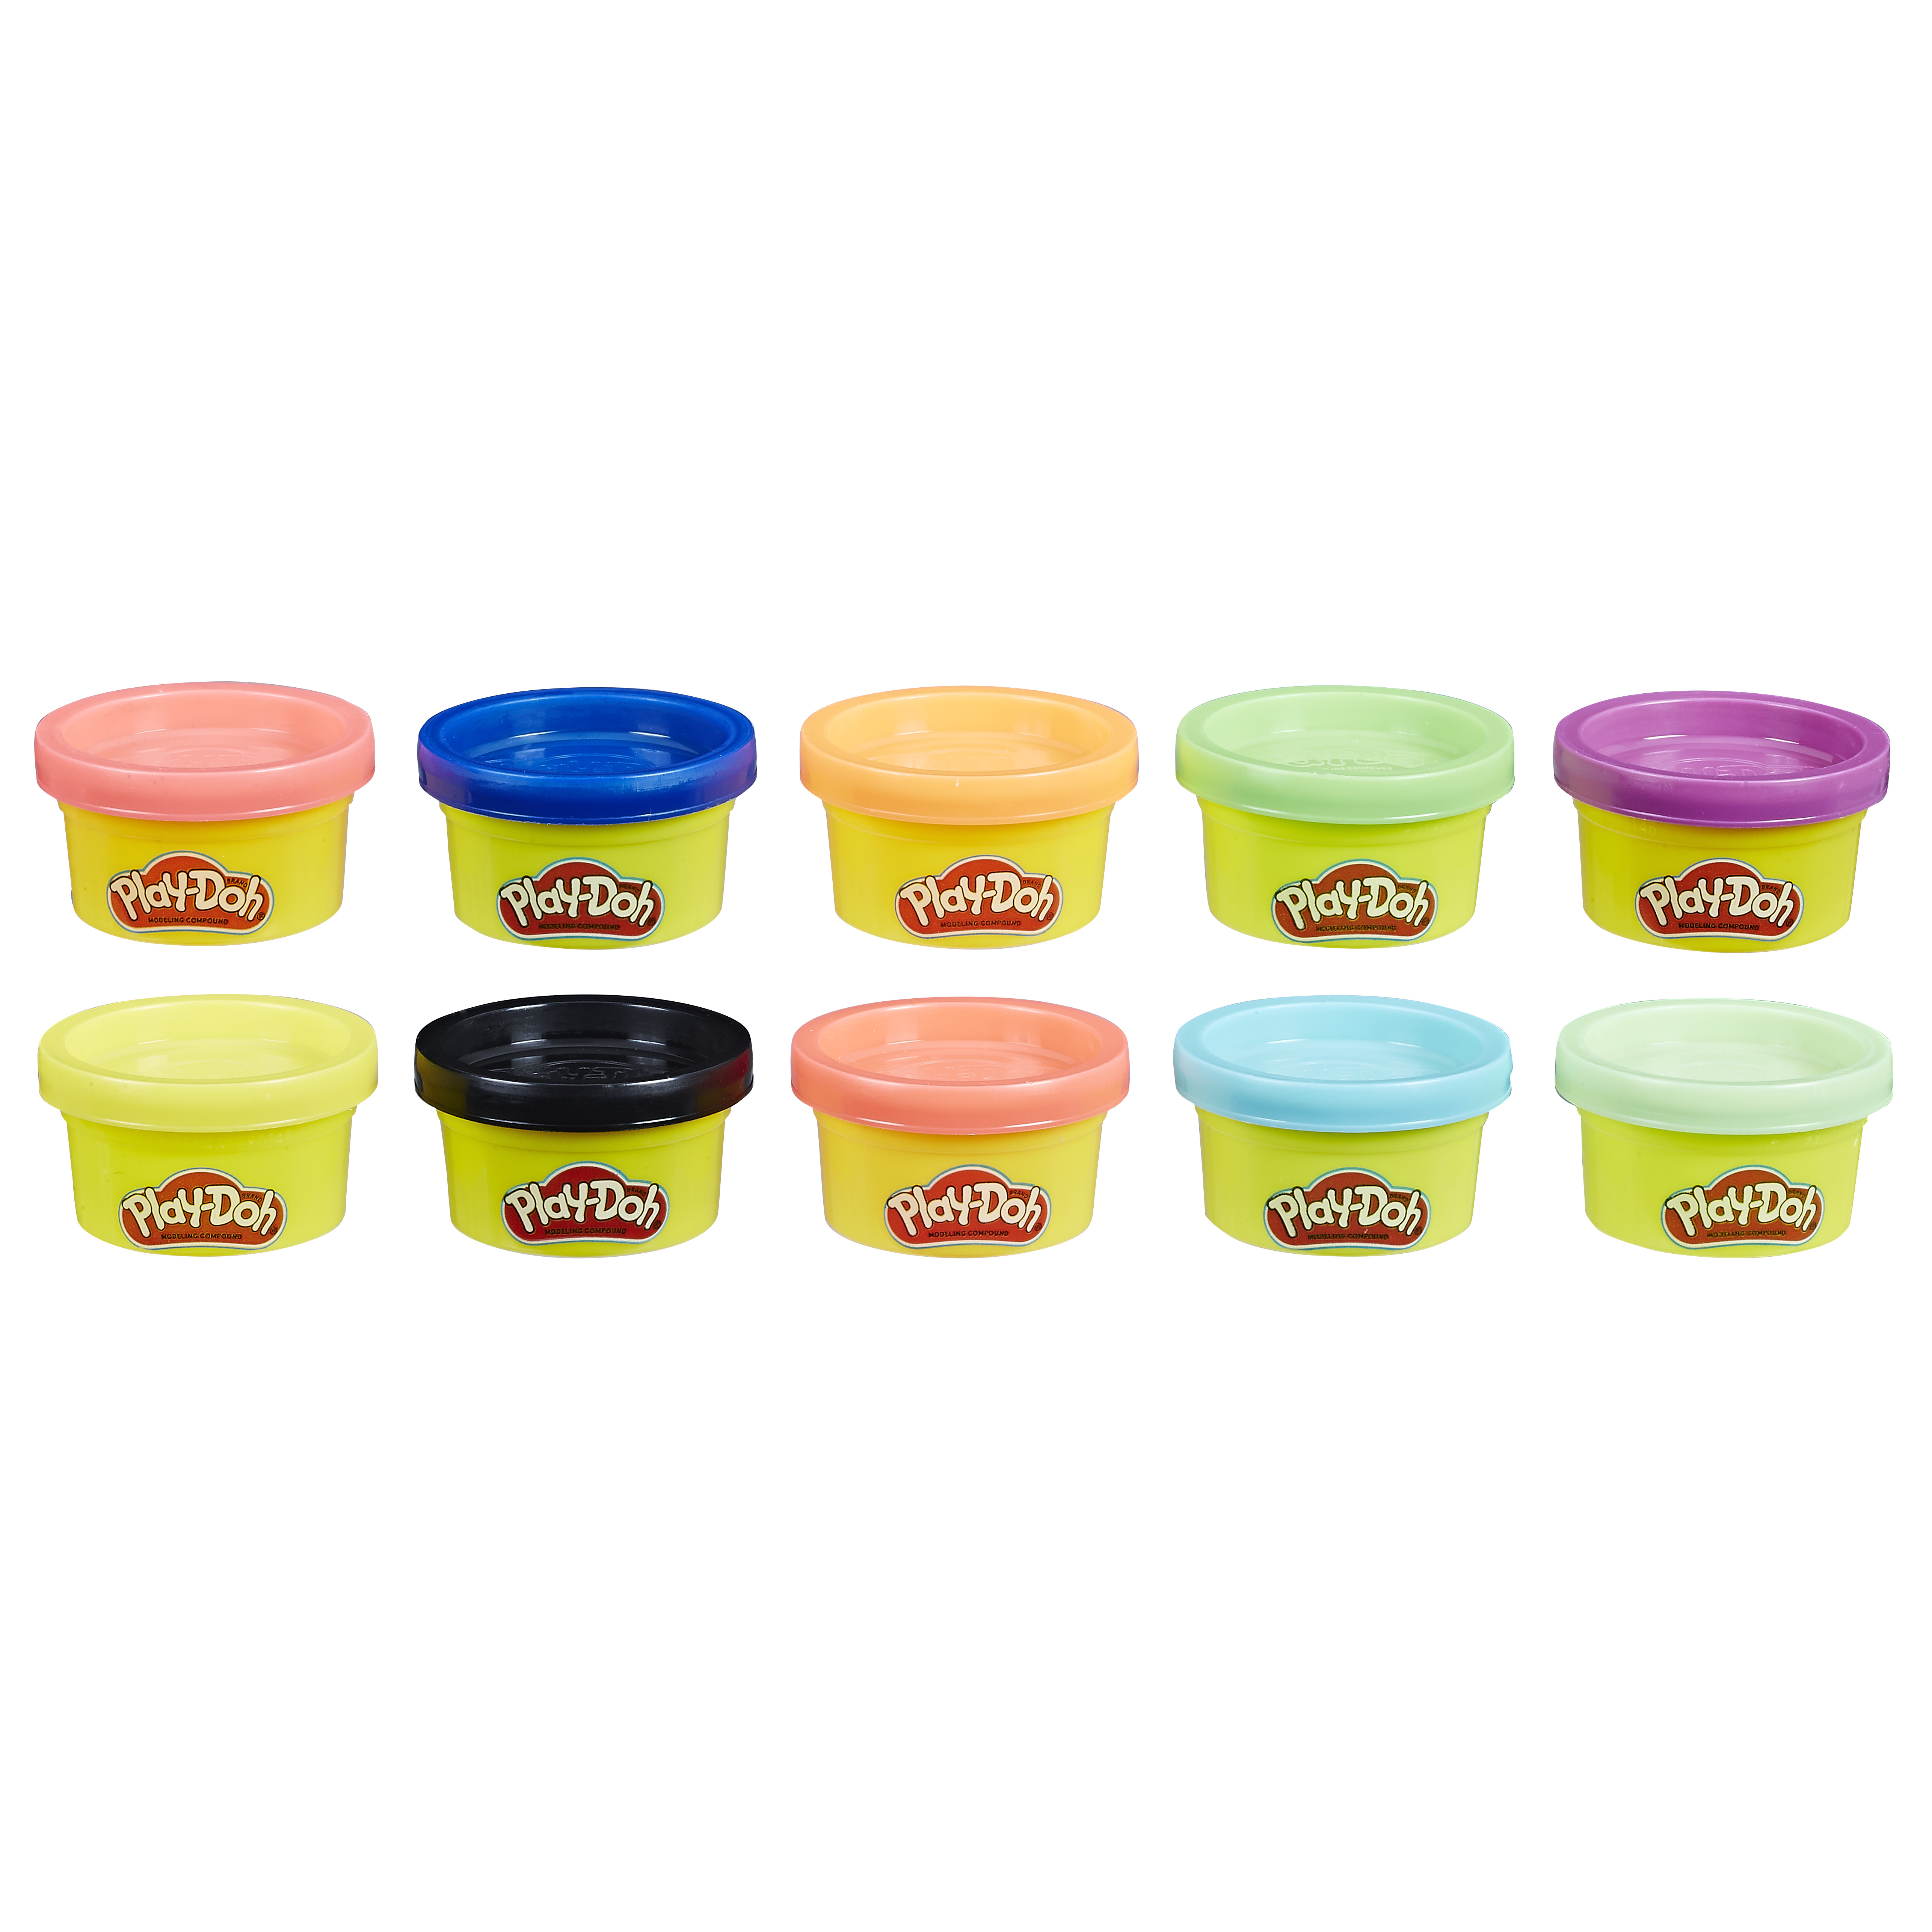 PLAY-DOH Play-Doh Party Spielset, Turm Mehrfarbig